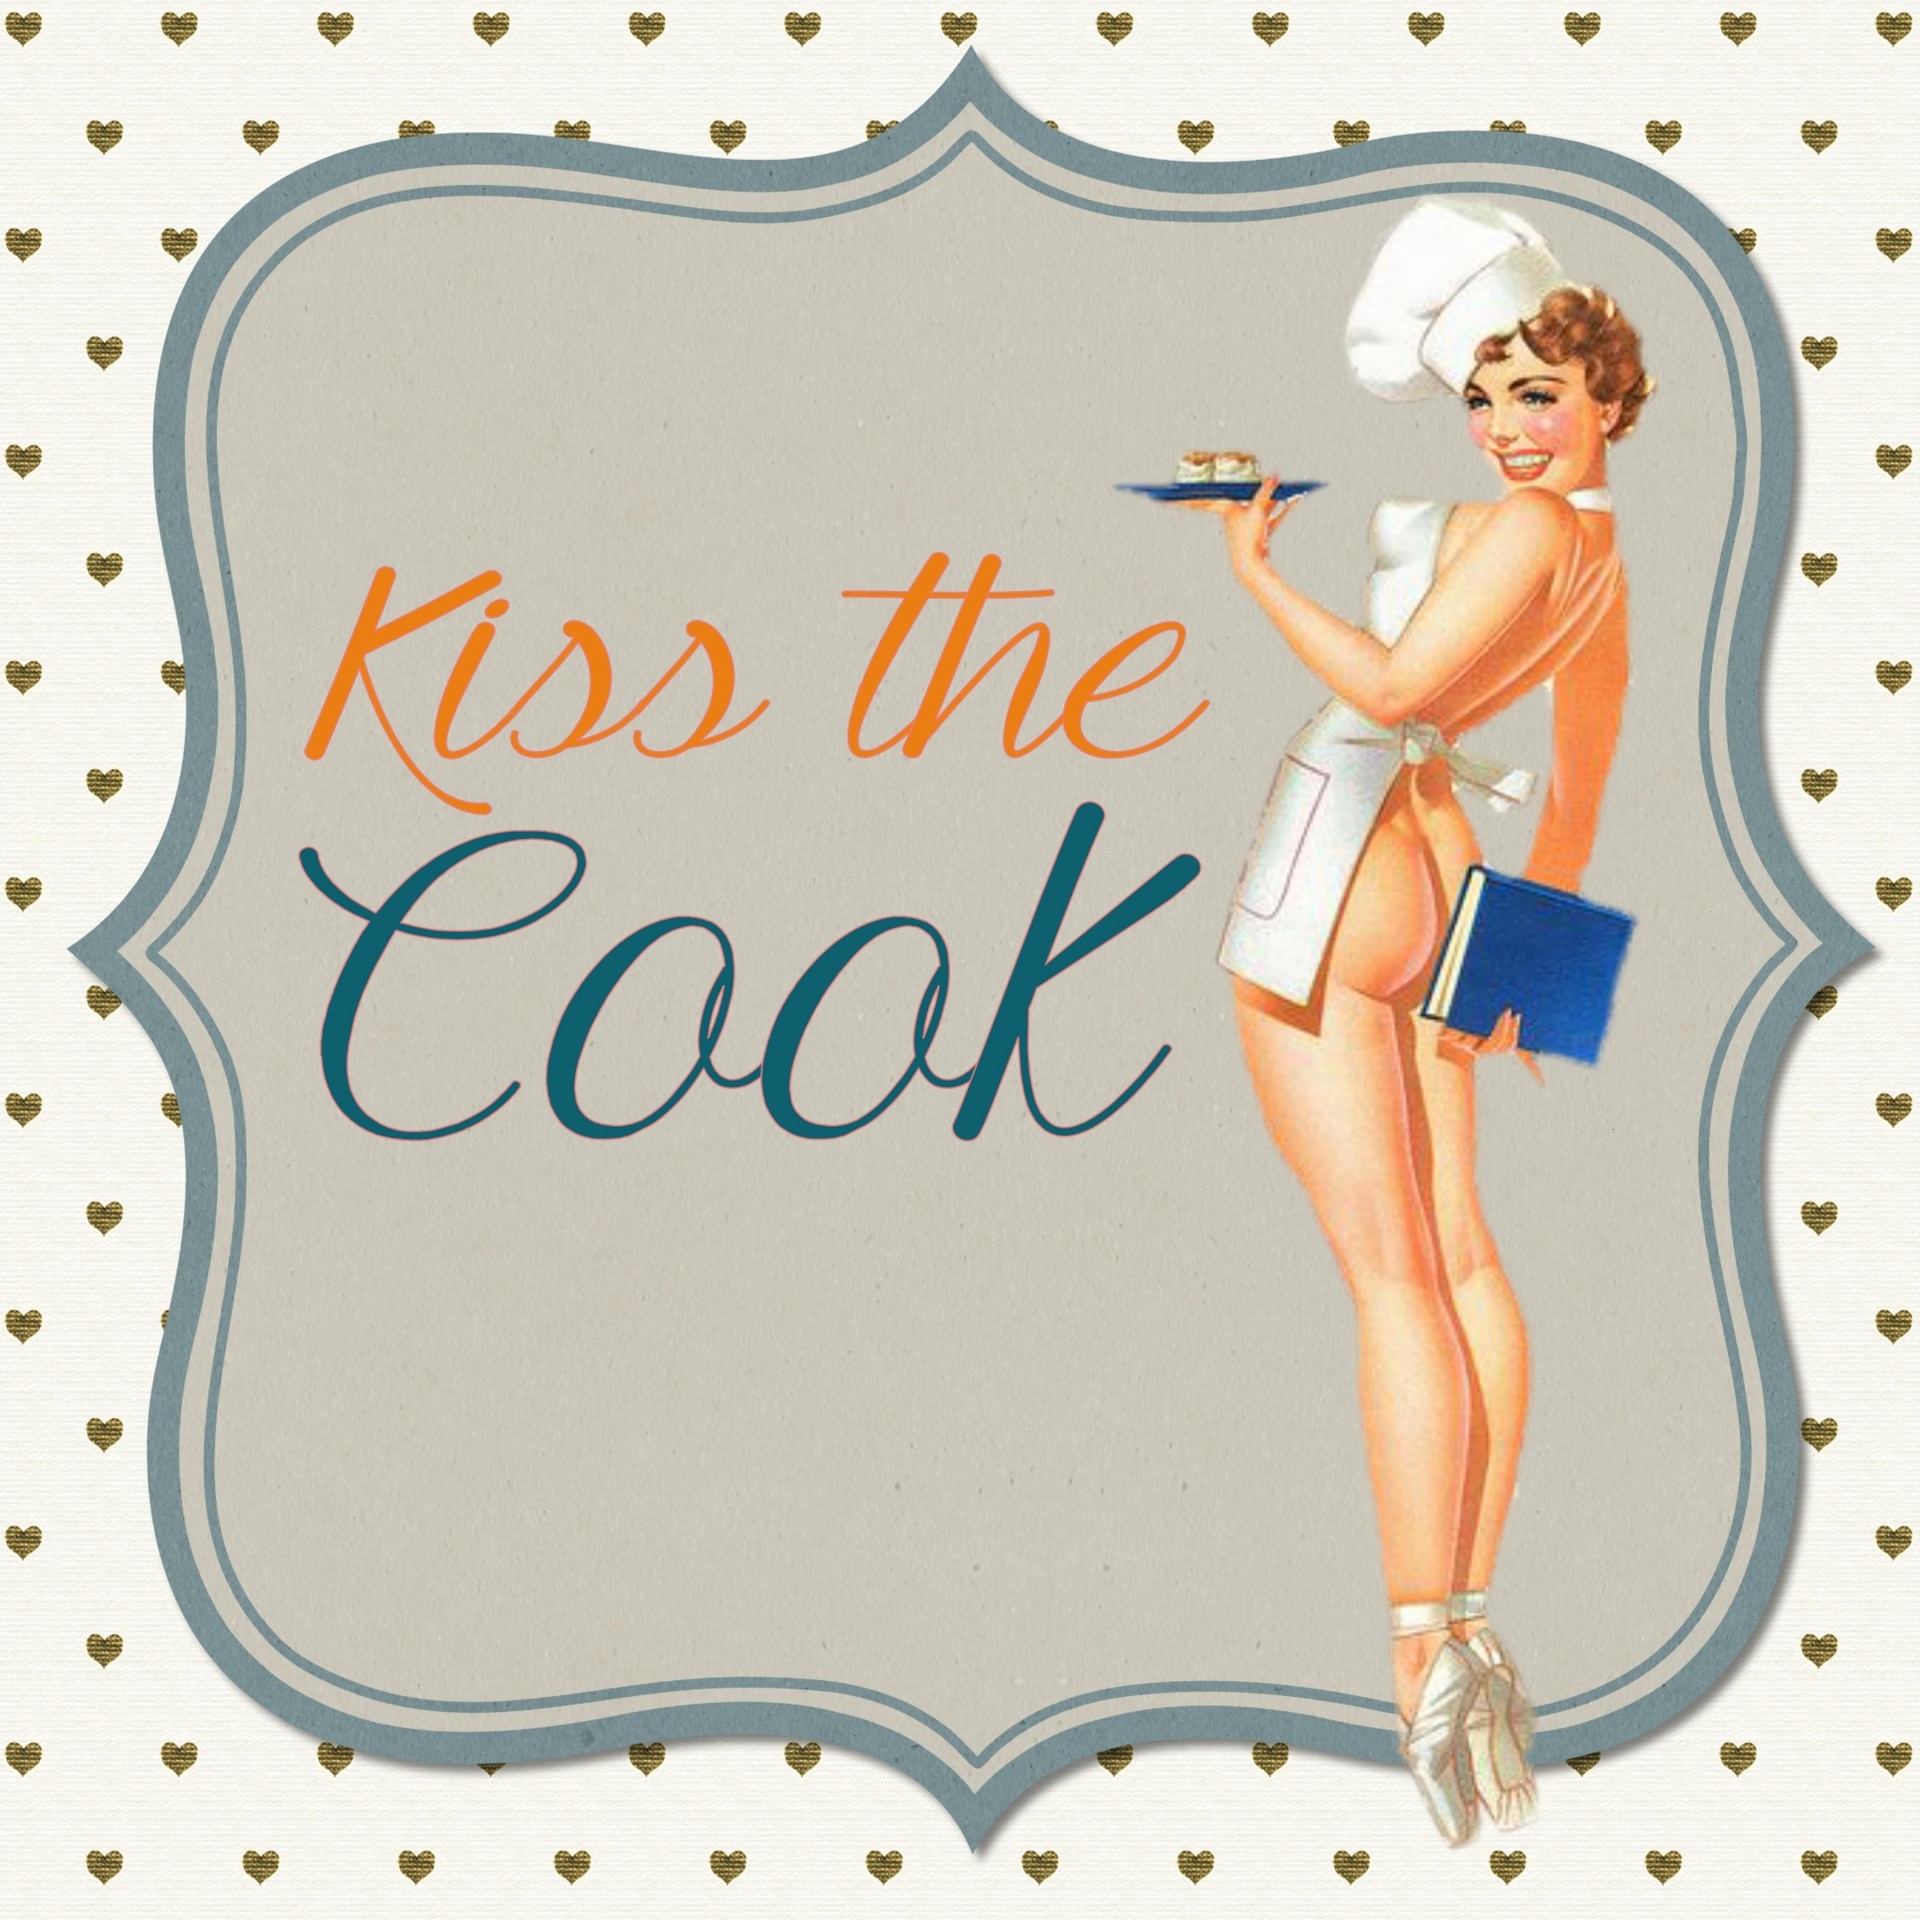 Retro Beautiful Pinup Lady Kiss the Cook Digital Art Collage Sexy Girl - A fun and modern rework of Vintage Retro Art. Perfect for art projects, decoupage, scrapbooking and more!